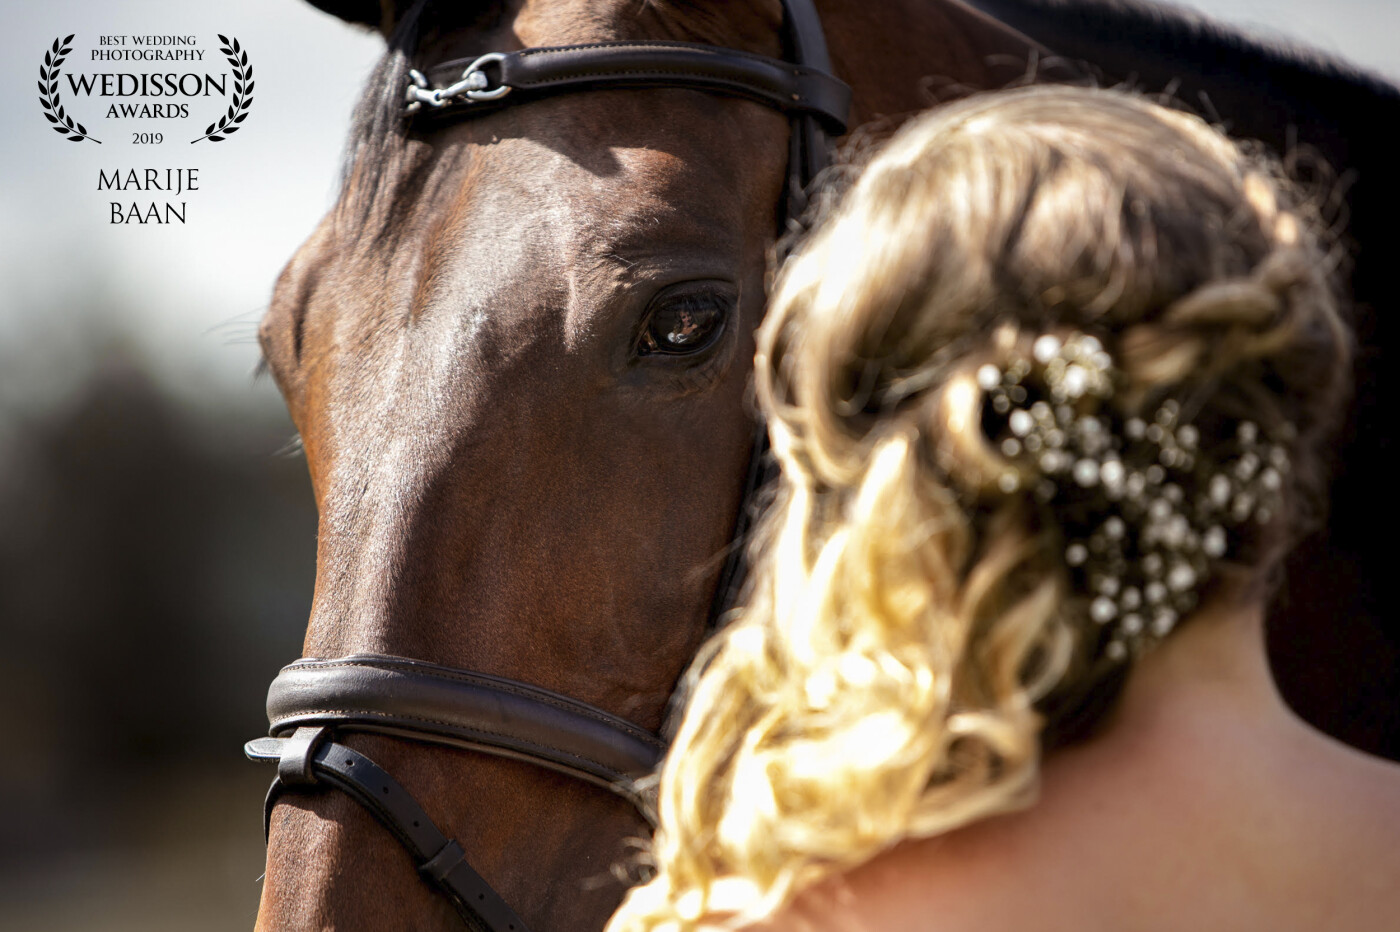 This horse was so special to the bride. You can see the special connection in the eye of the horse. The reflection is extra if you ask me.... Sadly the horse passed away shortly after the wedding, so the picture has become even more special an precious to all of us.